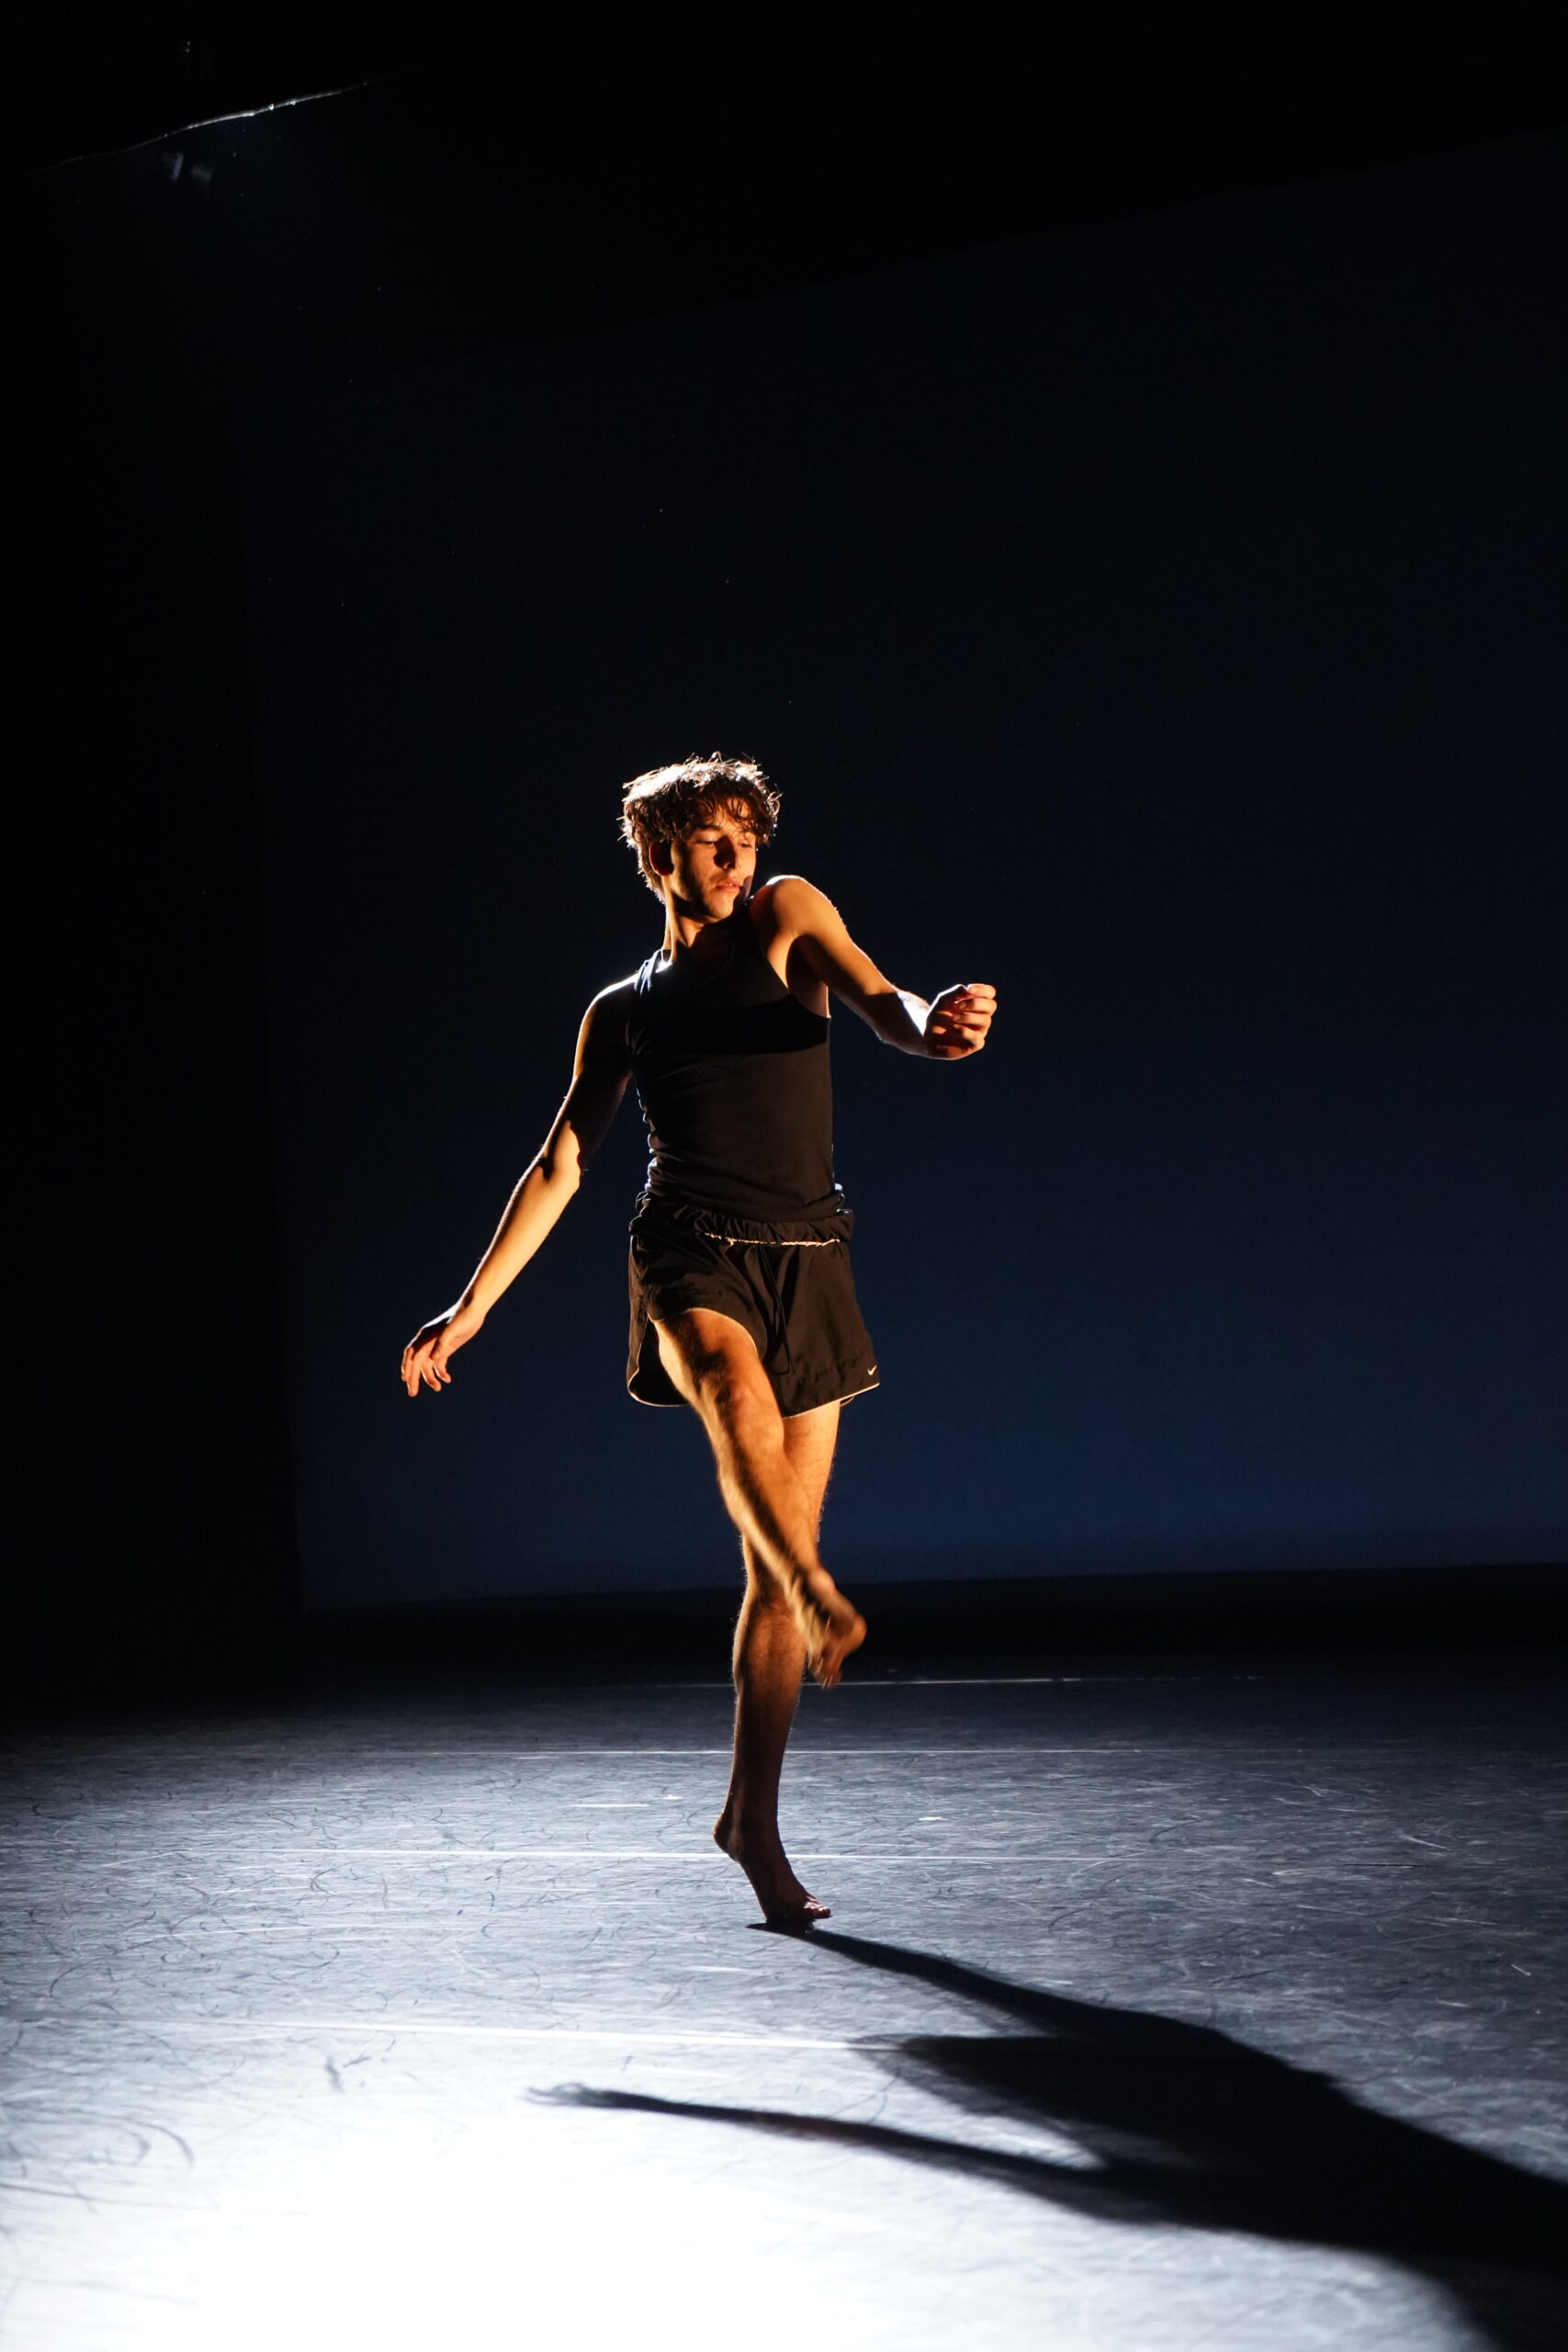 NYU Tisch Dance major Zev Haworth performing on a dimly lit stage.